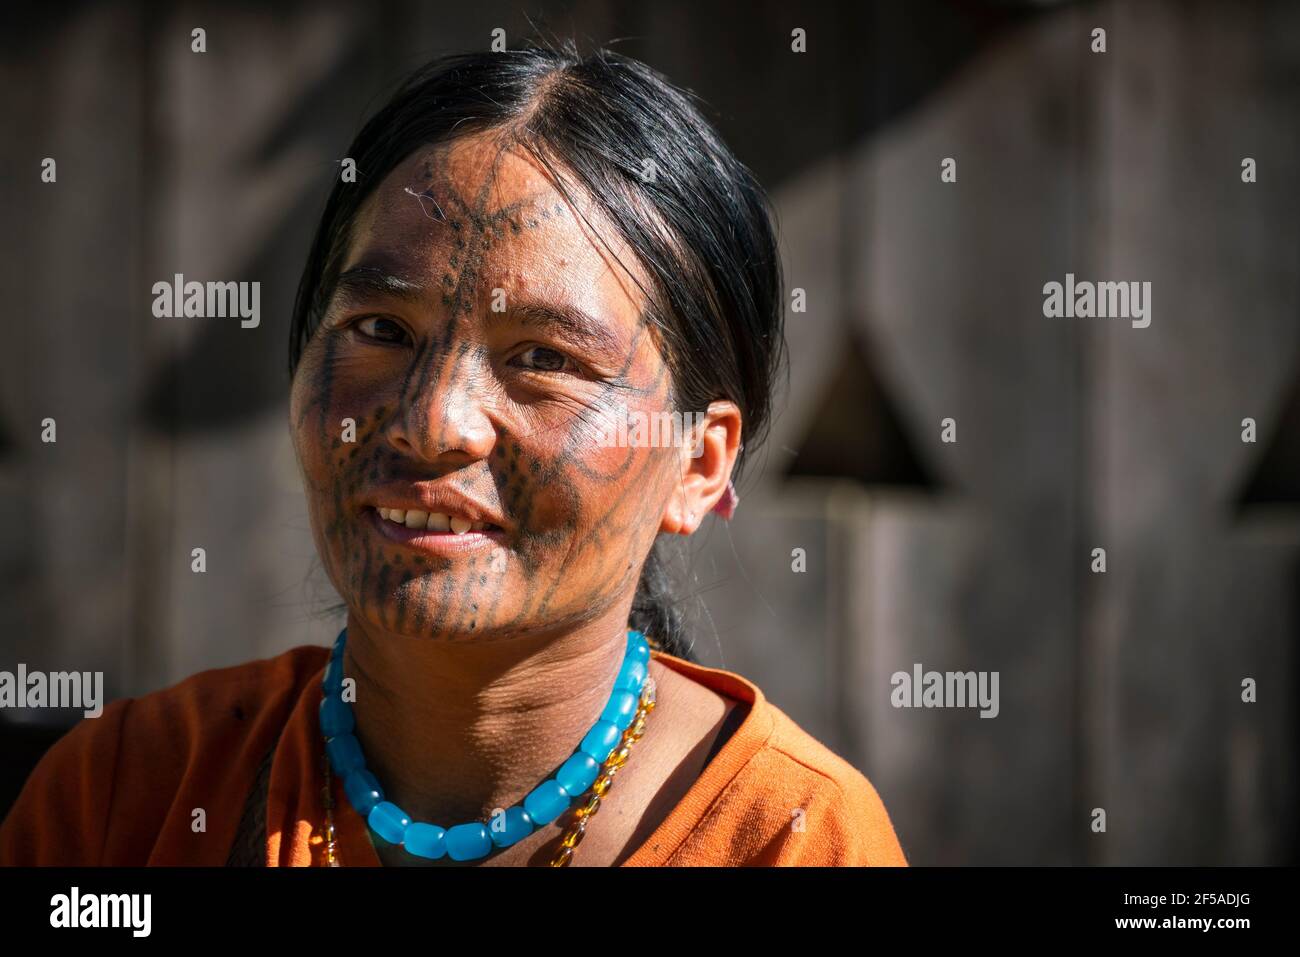 Young smiling woman with traditional facial tattoo, Mindat, Myanmar Stock Photo